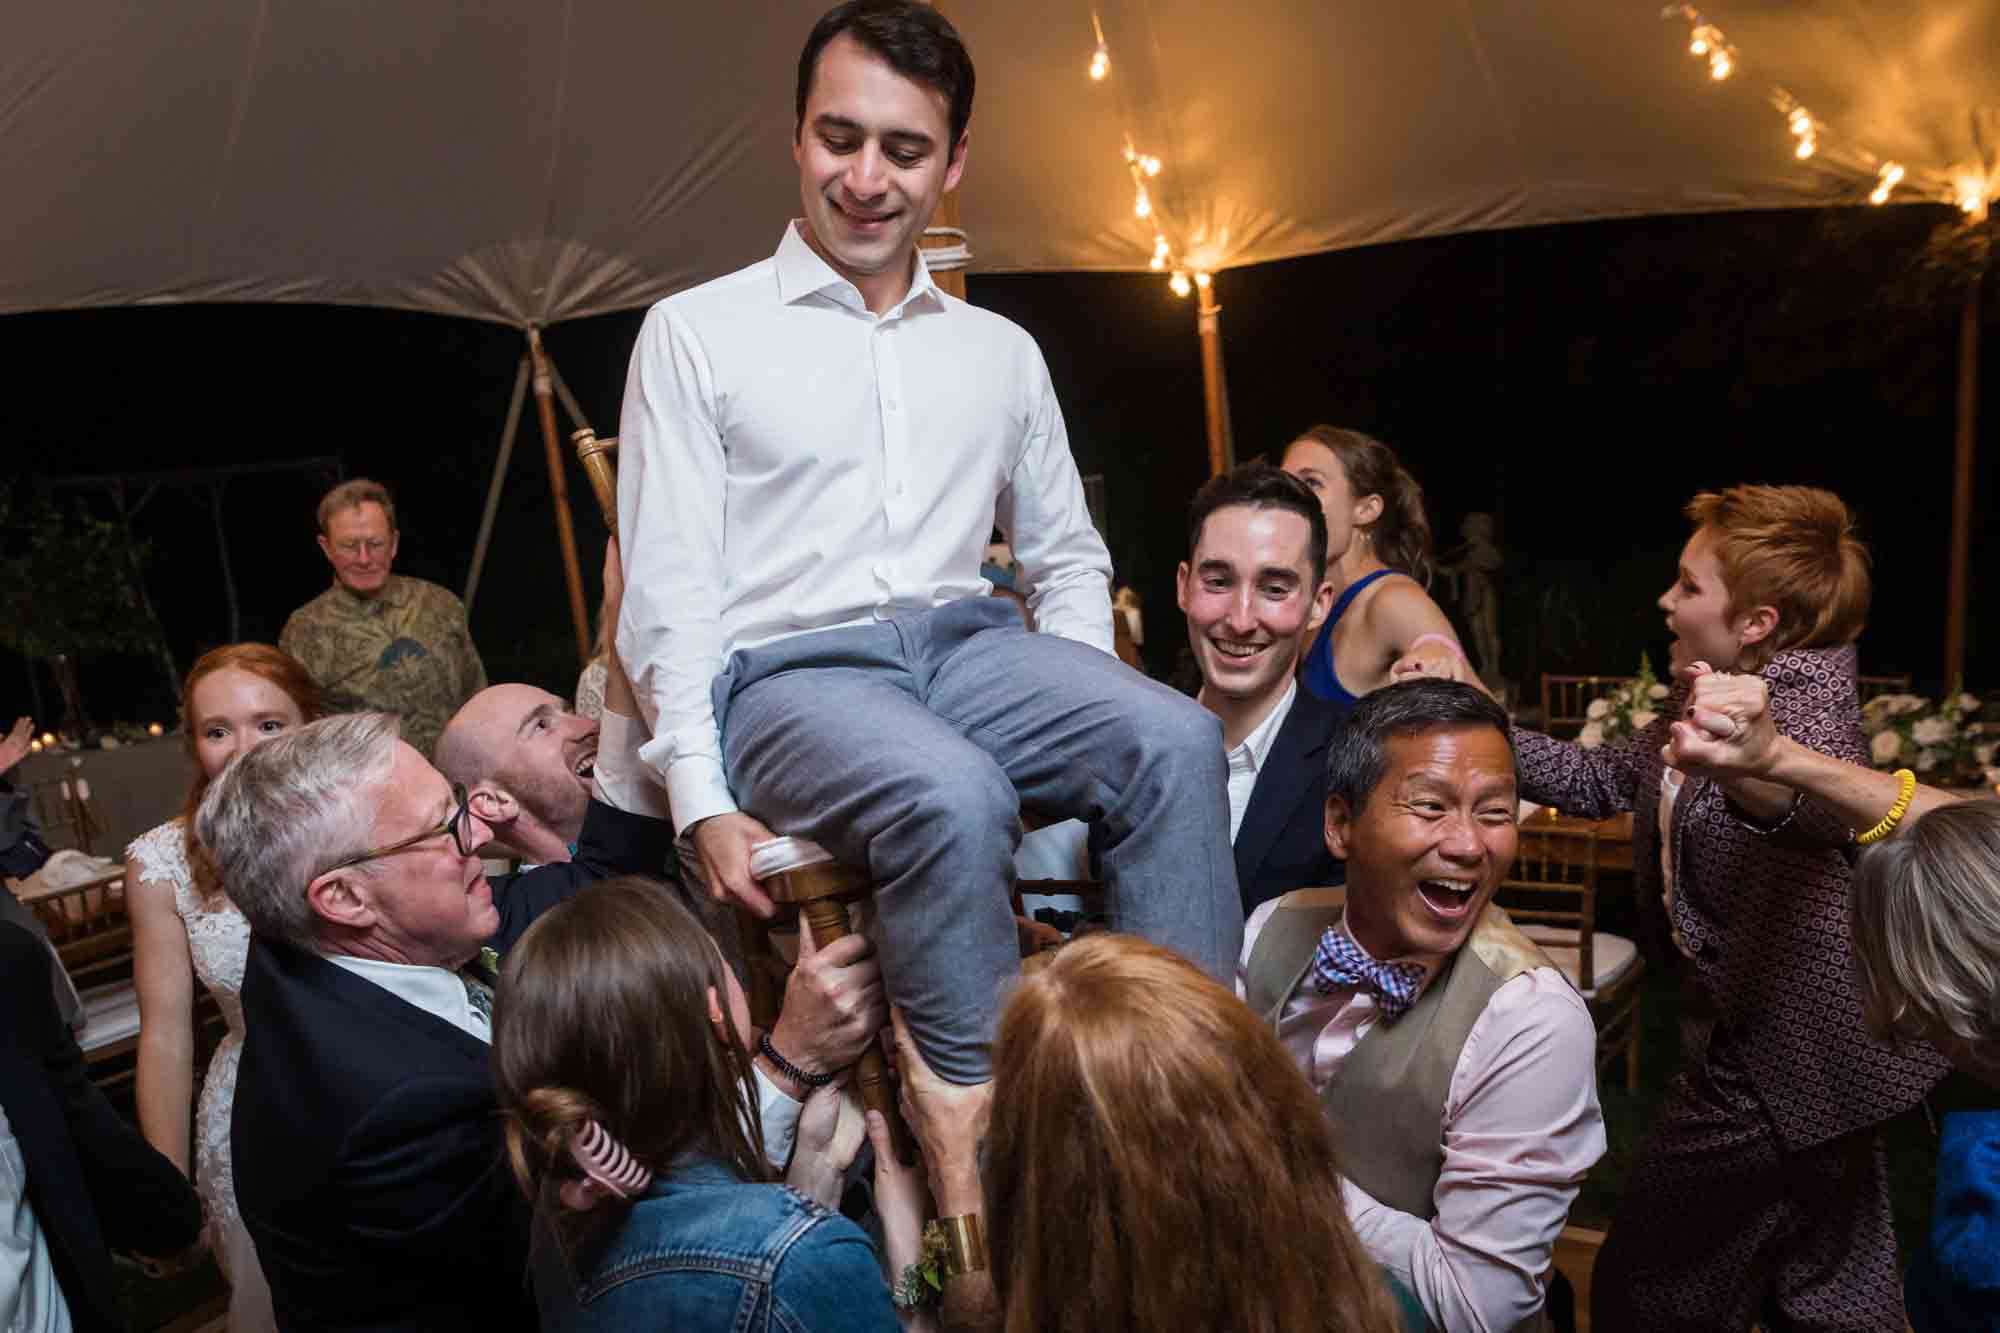 Groom lifted on chair during hora dance